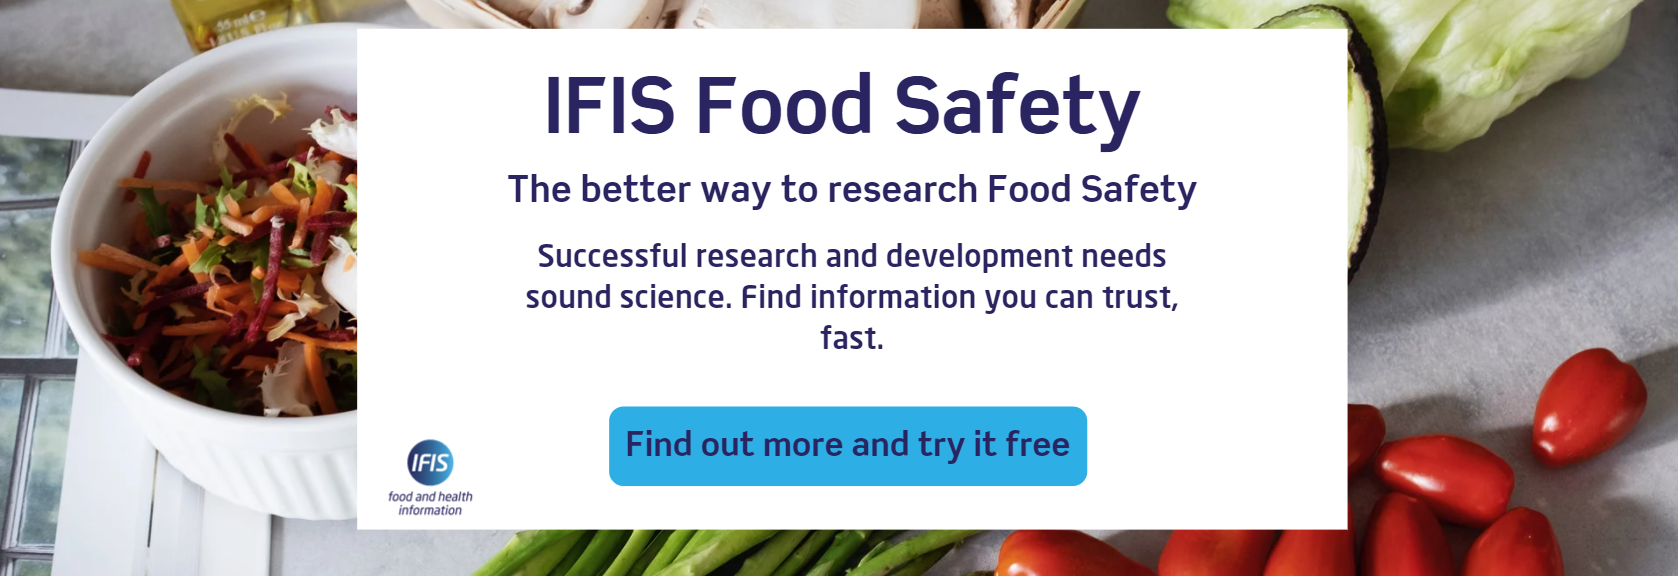 IFIS Food Safety - CTA 2-1